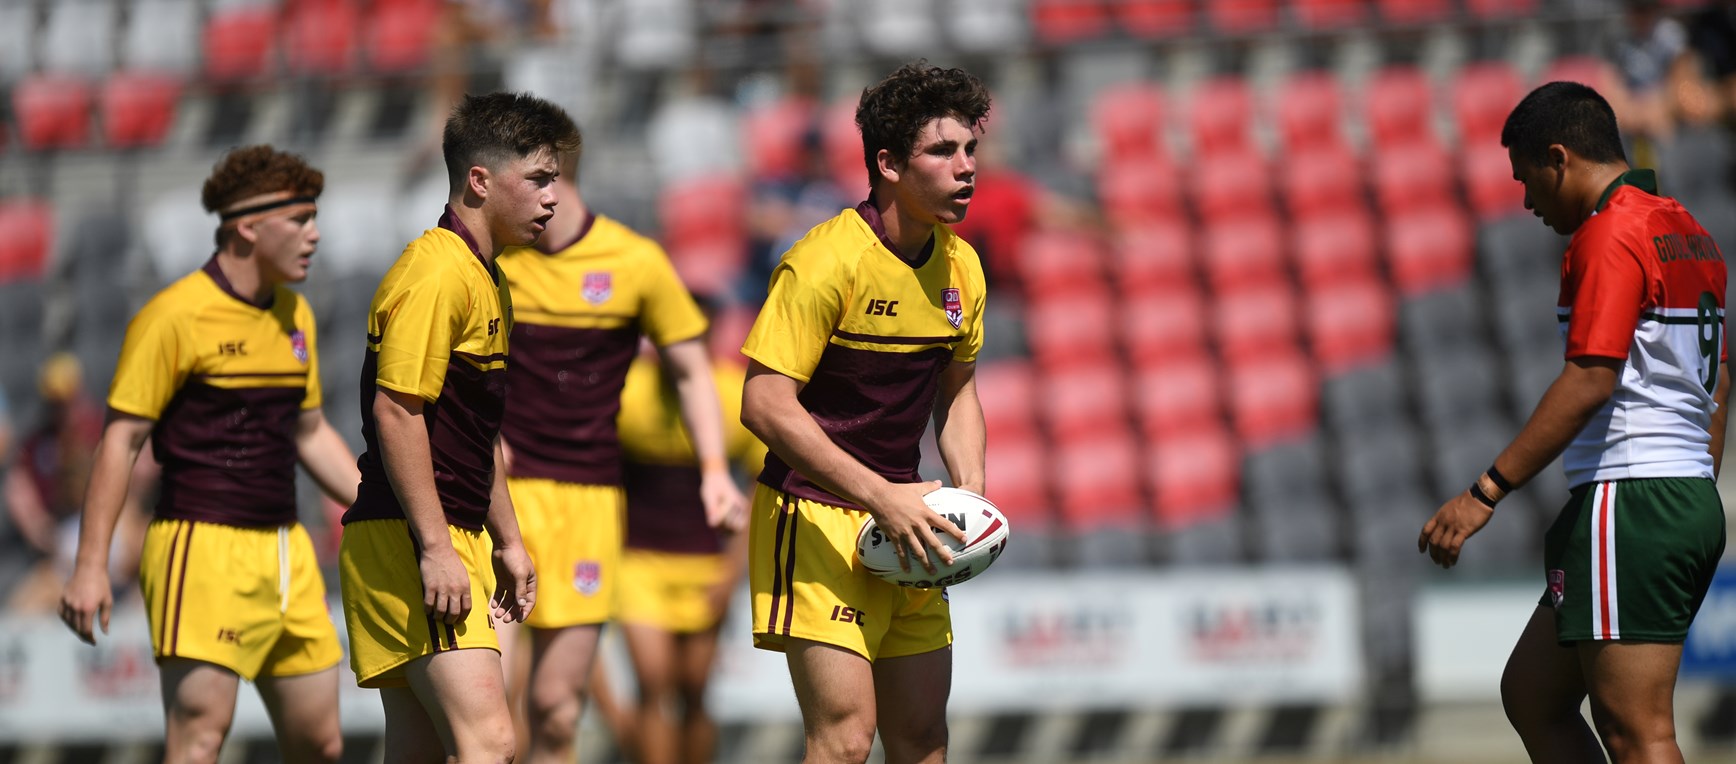 In pictures: Queensland Under 16 City v Country